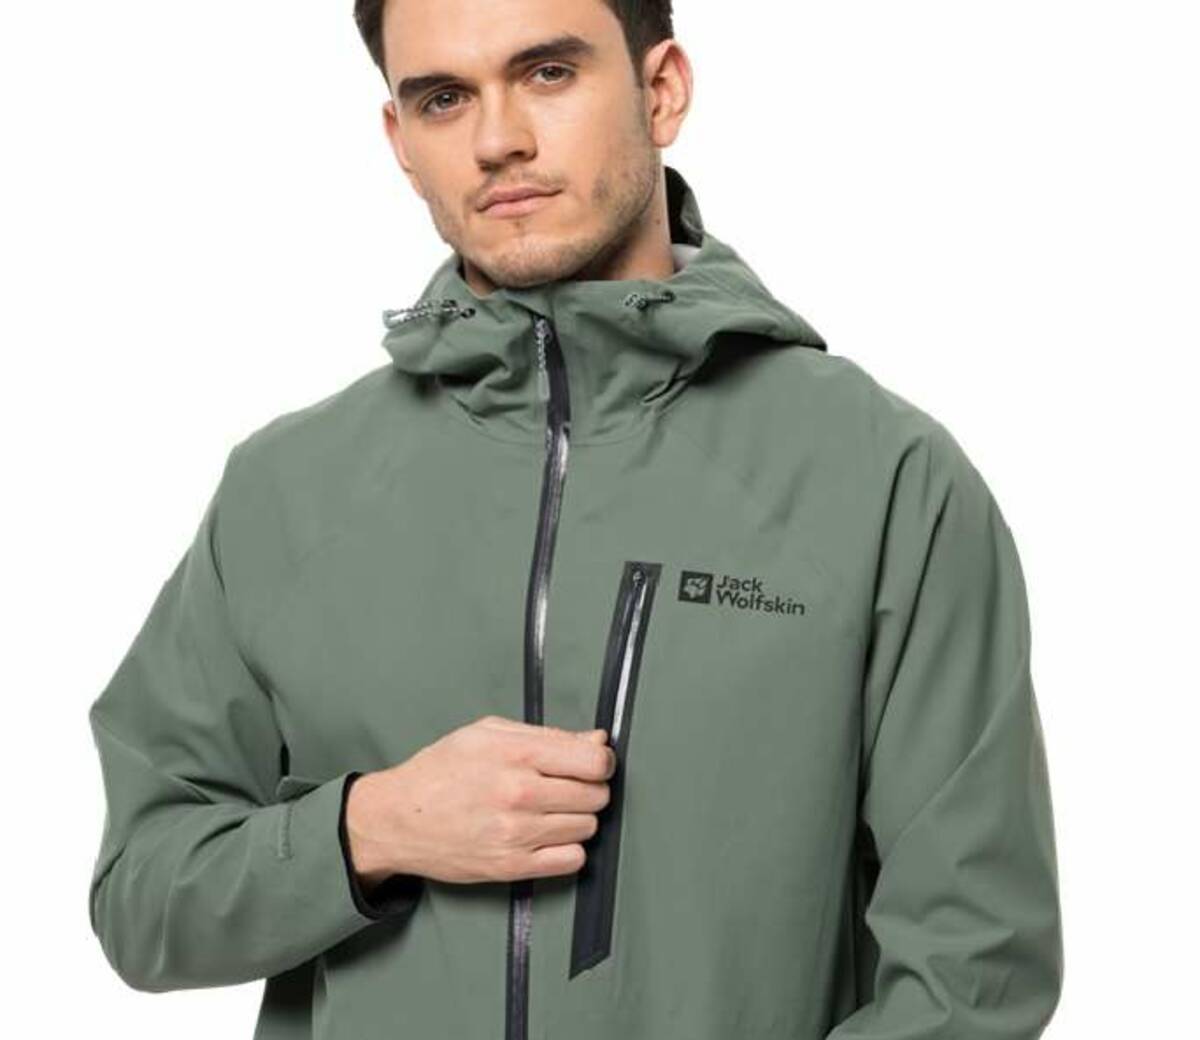 Voorganger Motel Decimale Jack Wolfskin's New Tapeless Jacket Features Zero Tape Technology |  Backpackers.com